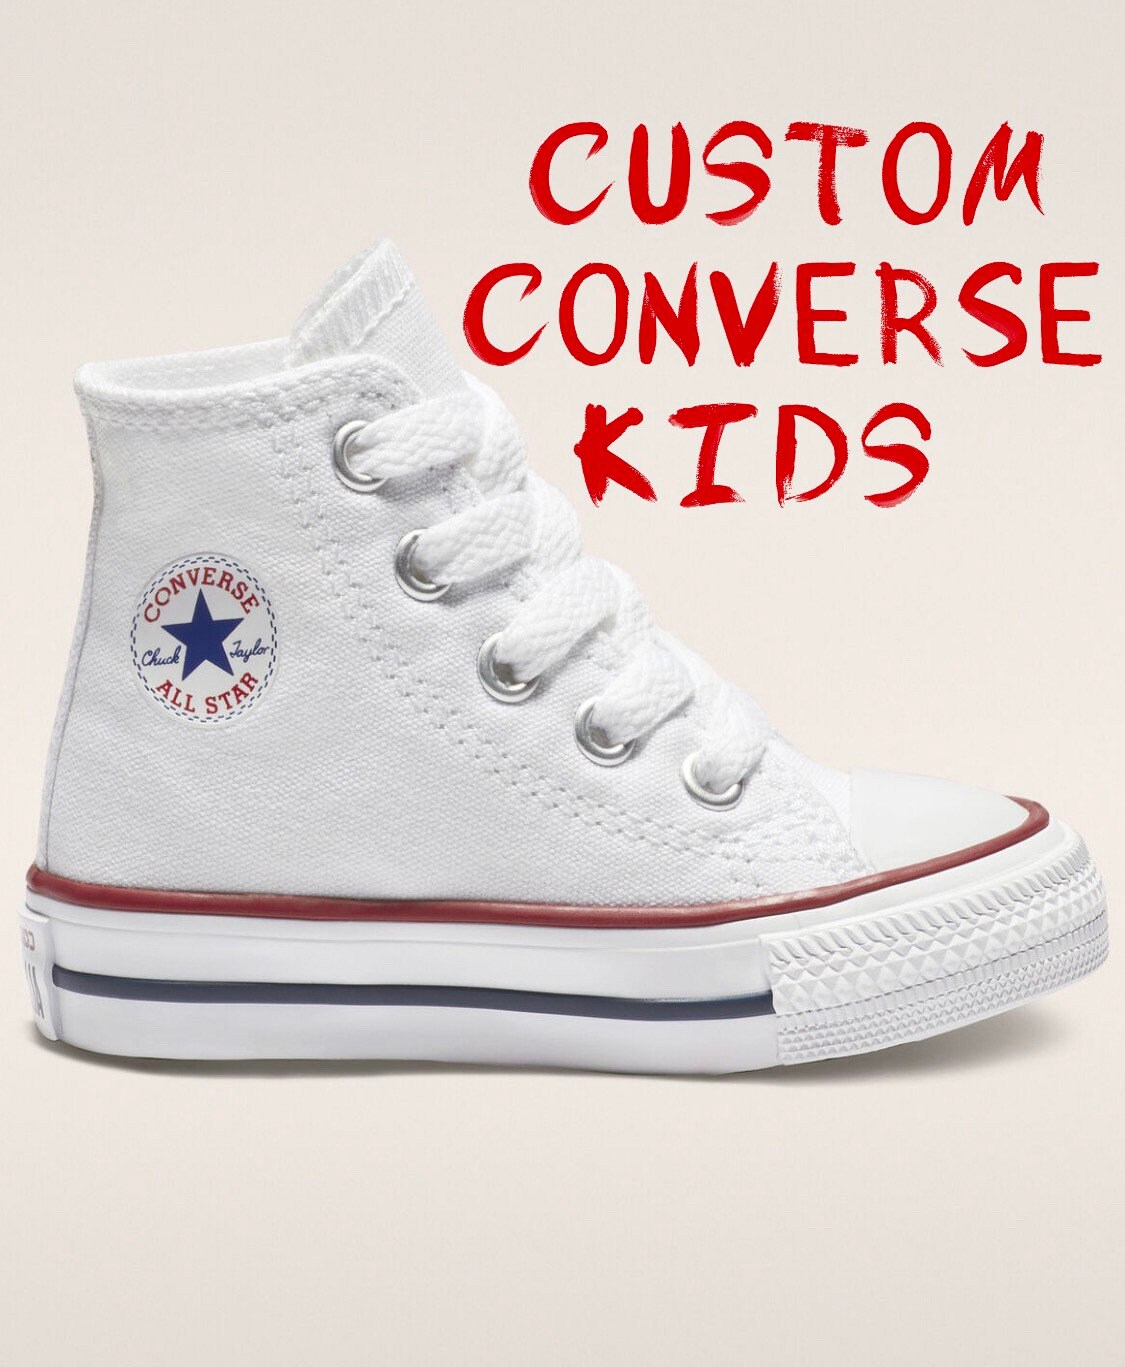 Kids Converse Shoes Online In - Etsy India